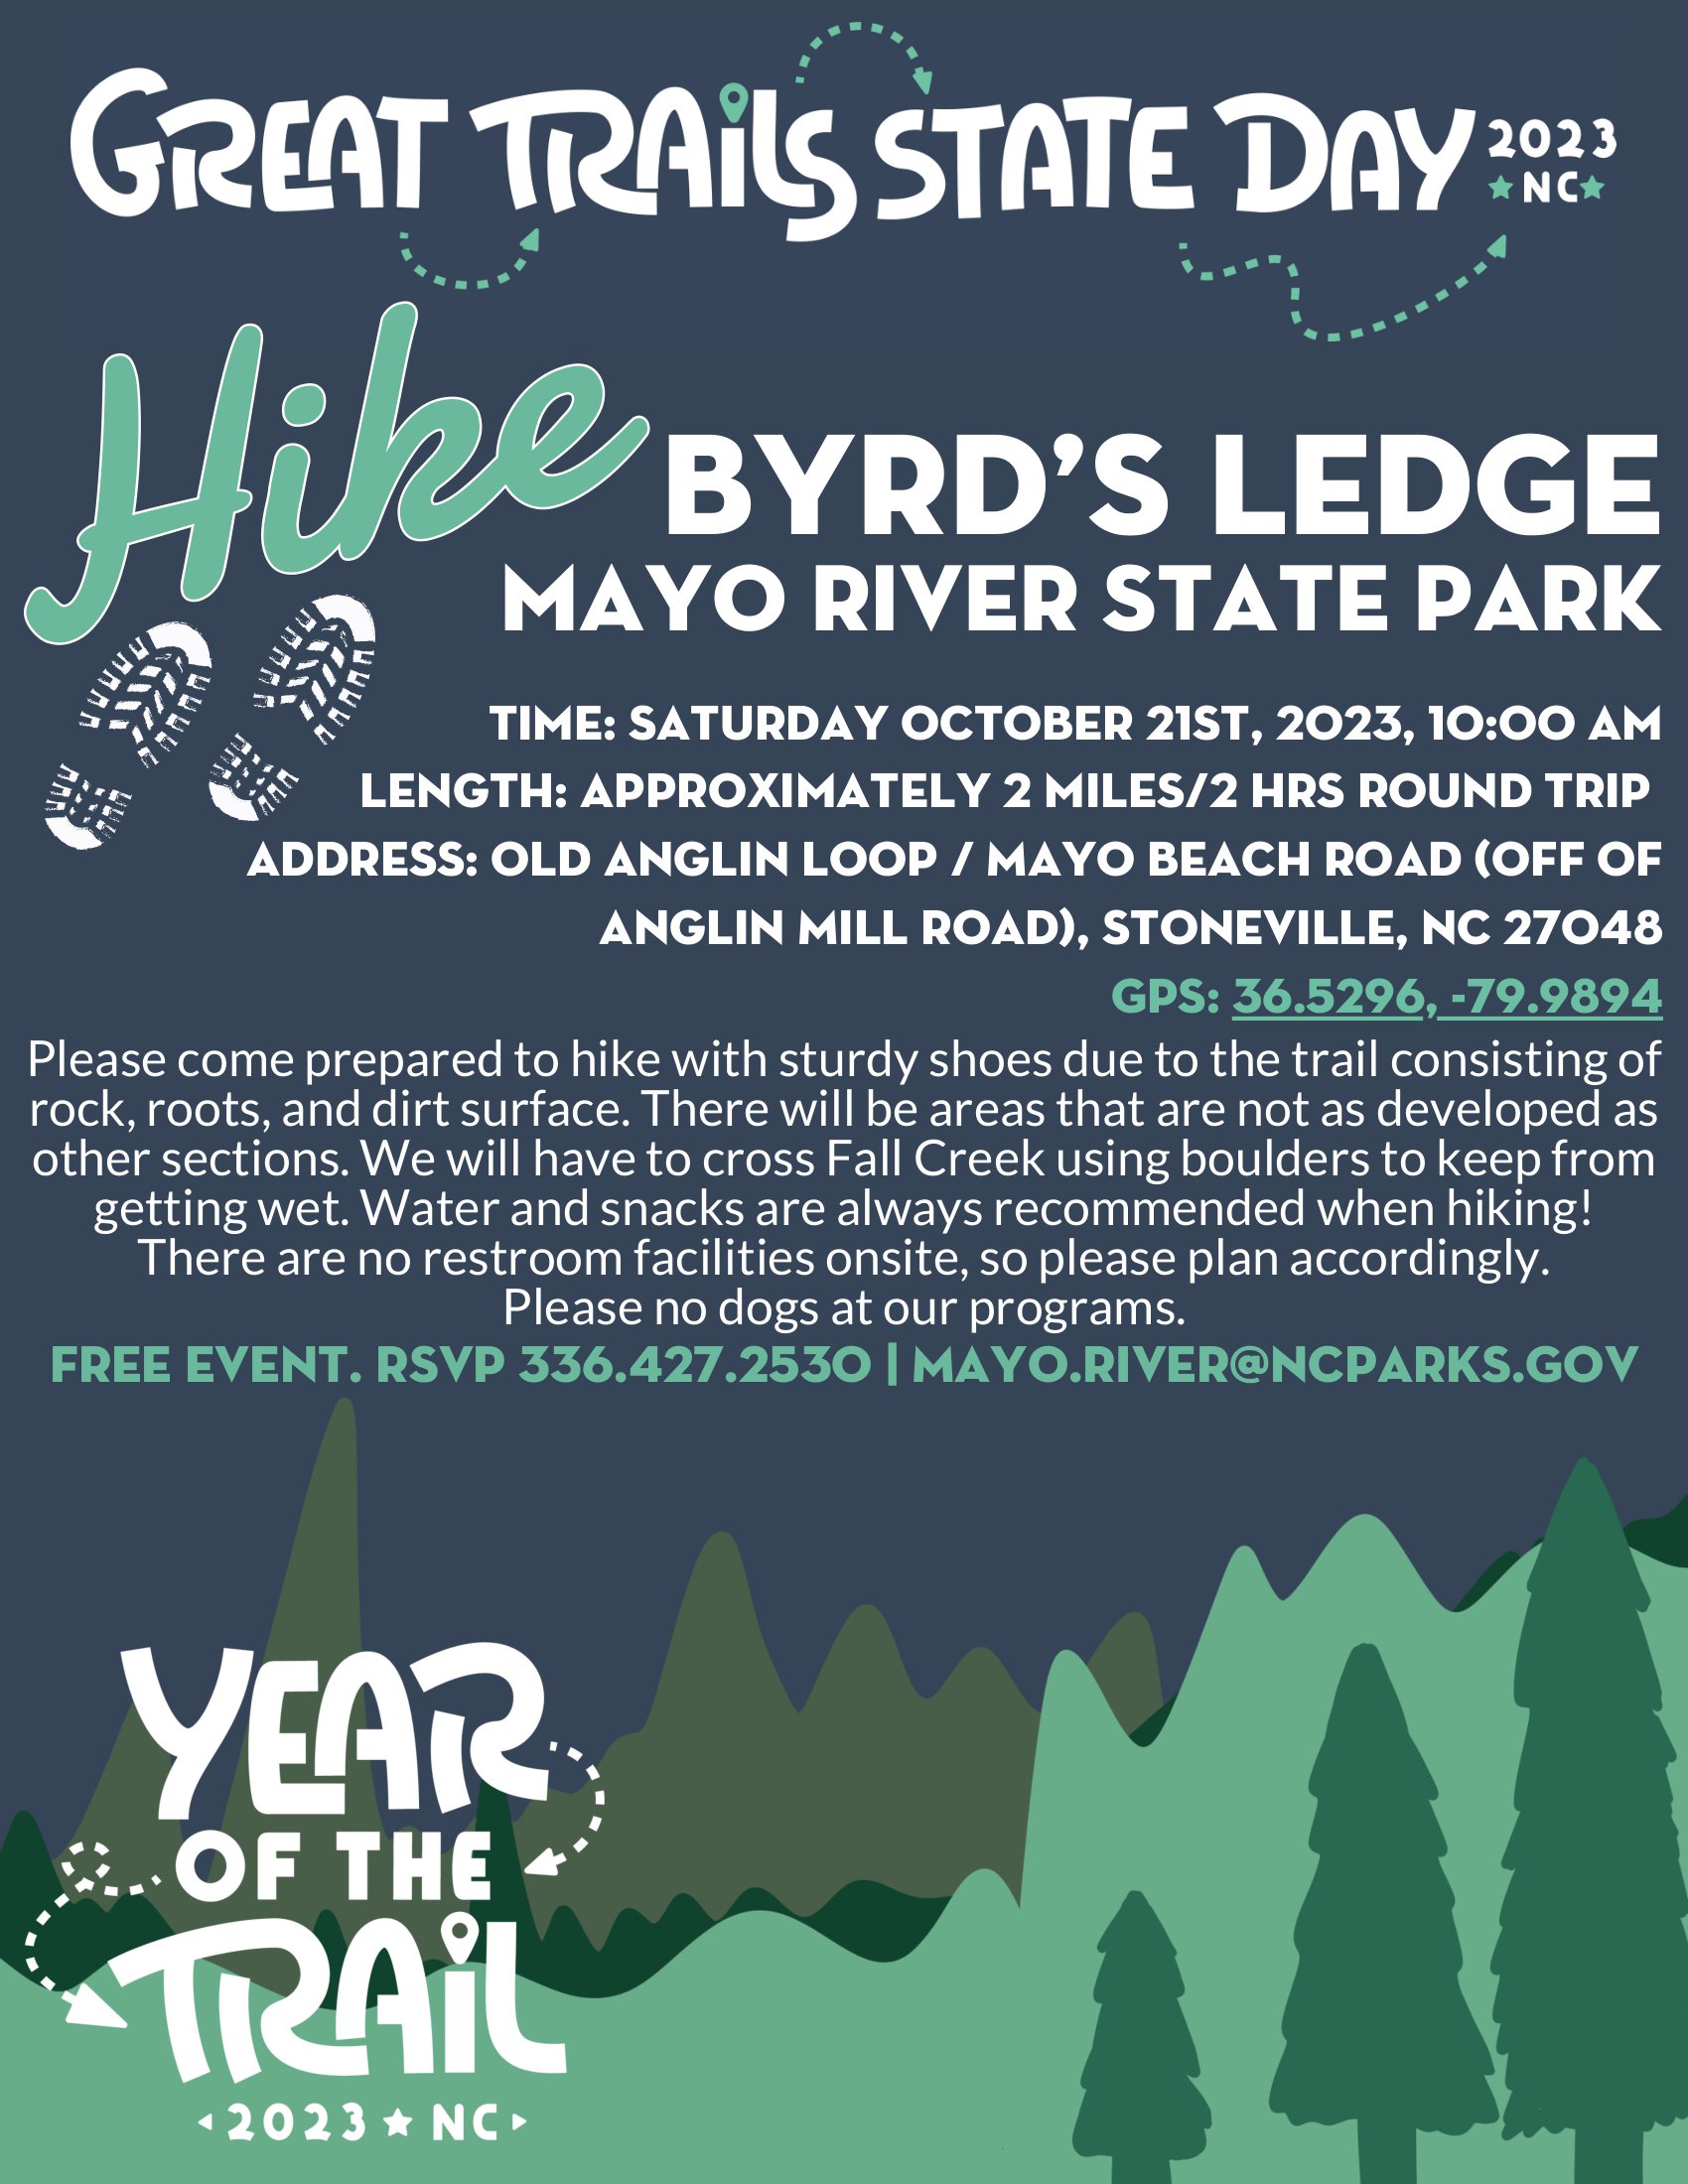 Hike with us at mayo river state park for great trails state day!